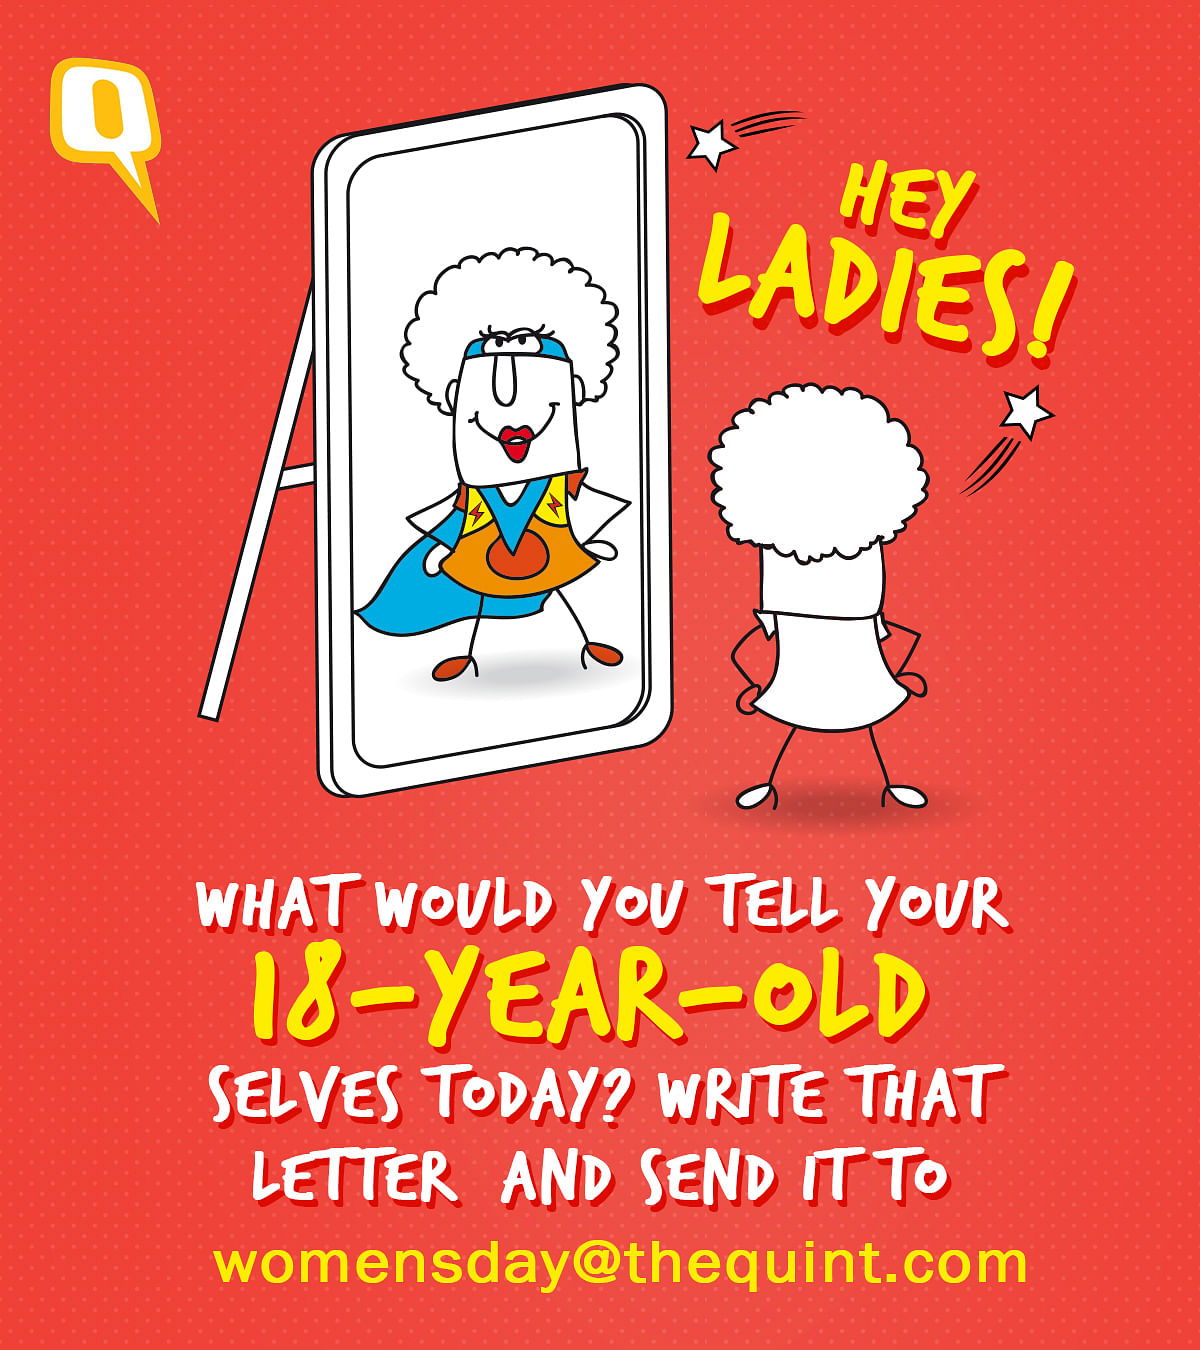 
Guess what! Here’s your chance to write a letter to your 18-year-old self!

